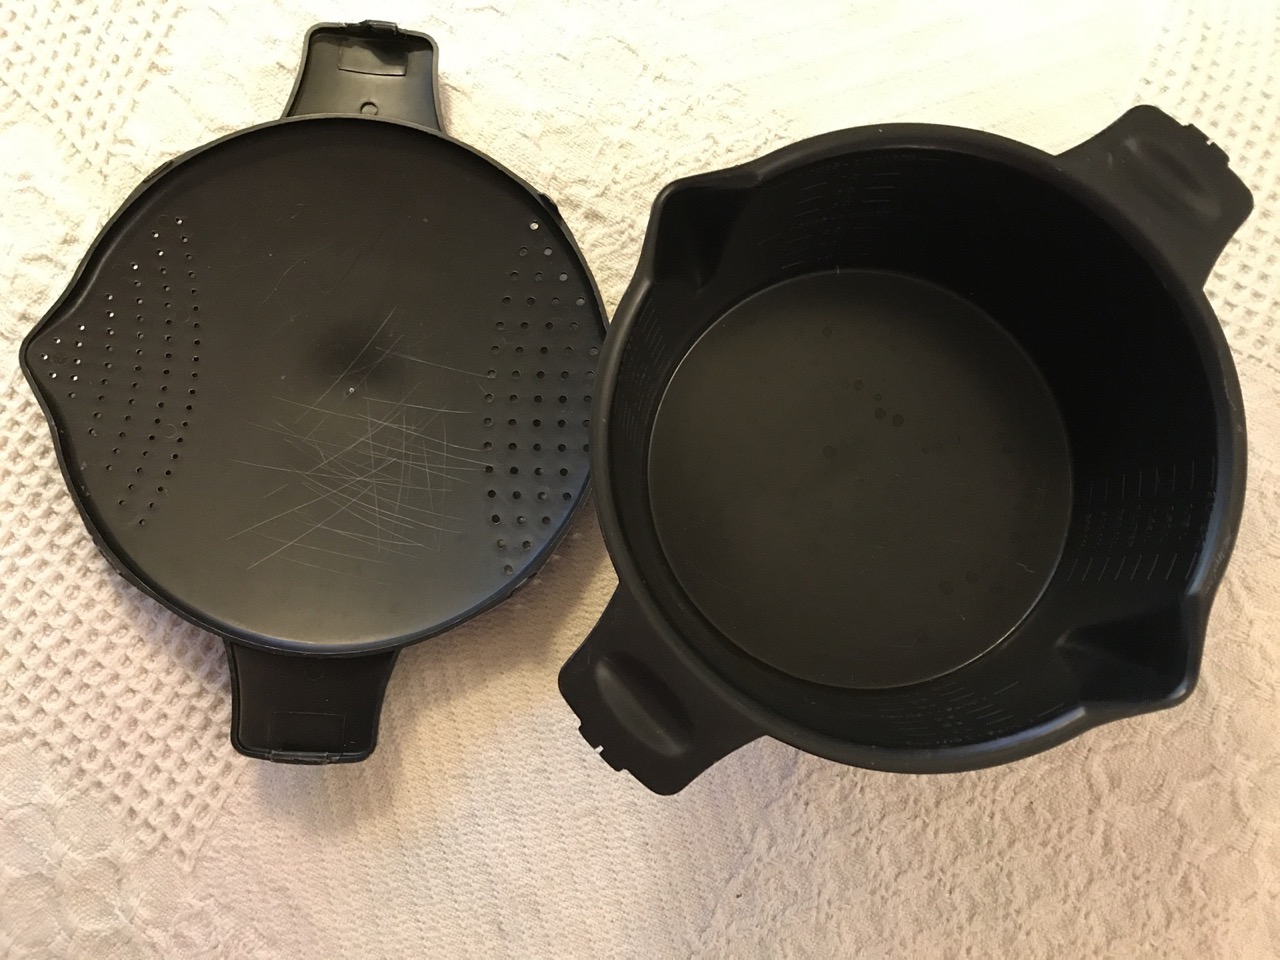 Pampered Chef - The Large Micro-Cooker® is perfect for melting butter or  chocolate, heating soup, steaming veggies or even poaching chicken:   How do you use it at home?